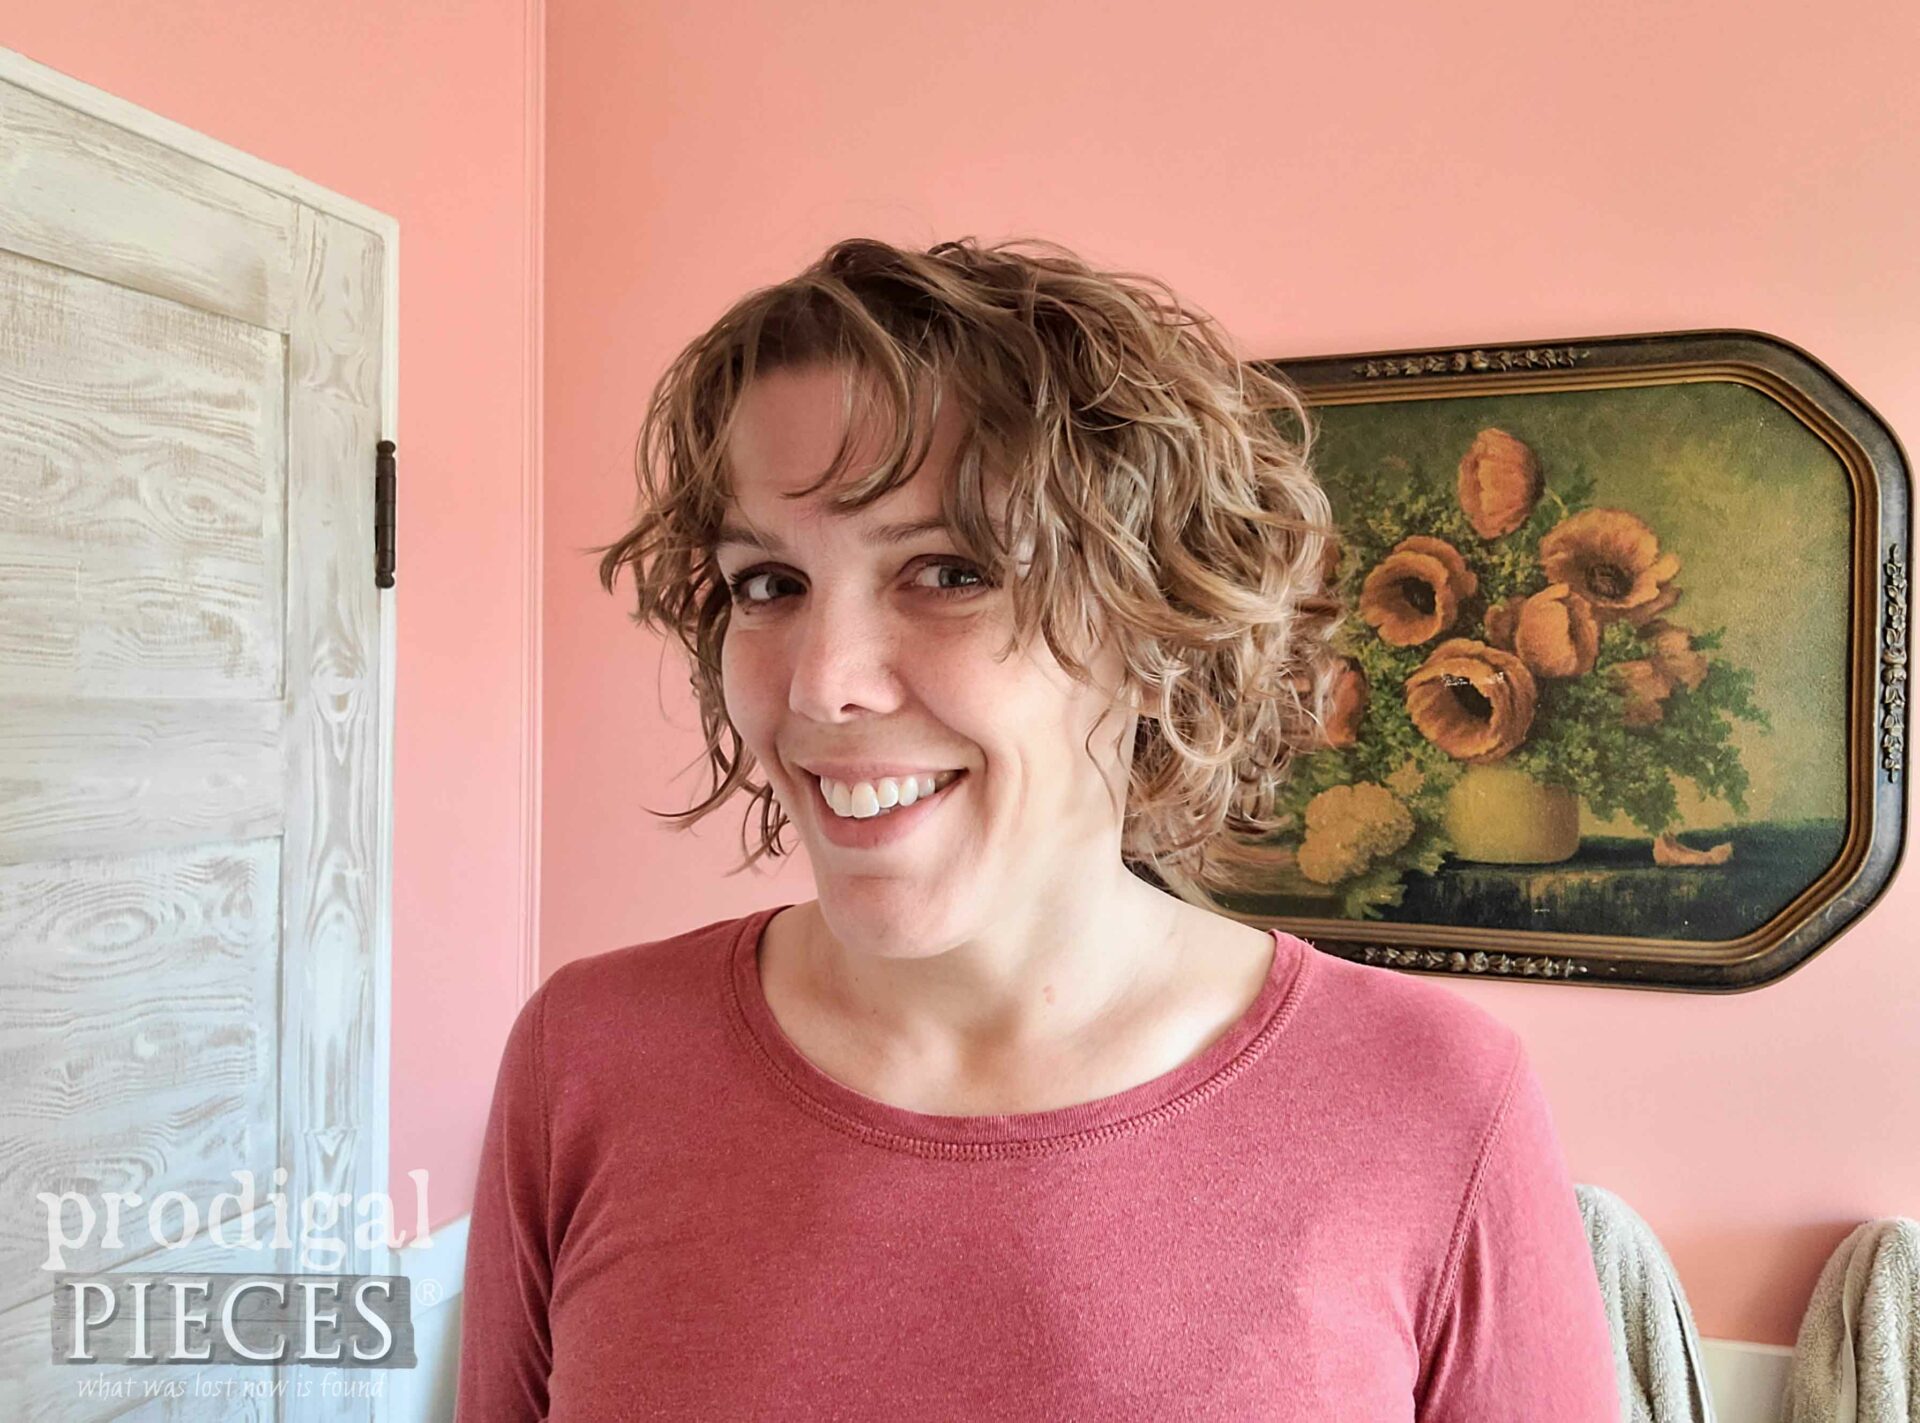 Larissa of Prodigal Pieces with her DIY Short Curly Bob Haircut | prodigalpieces.com #prodigalpieces